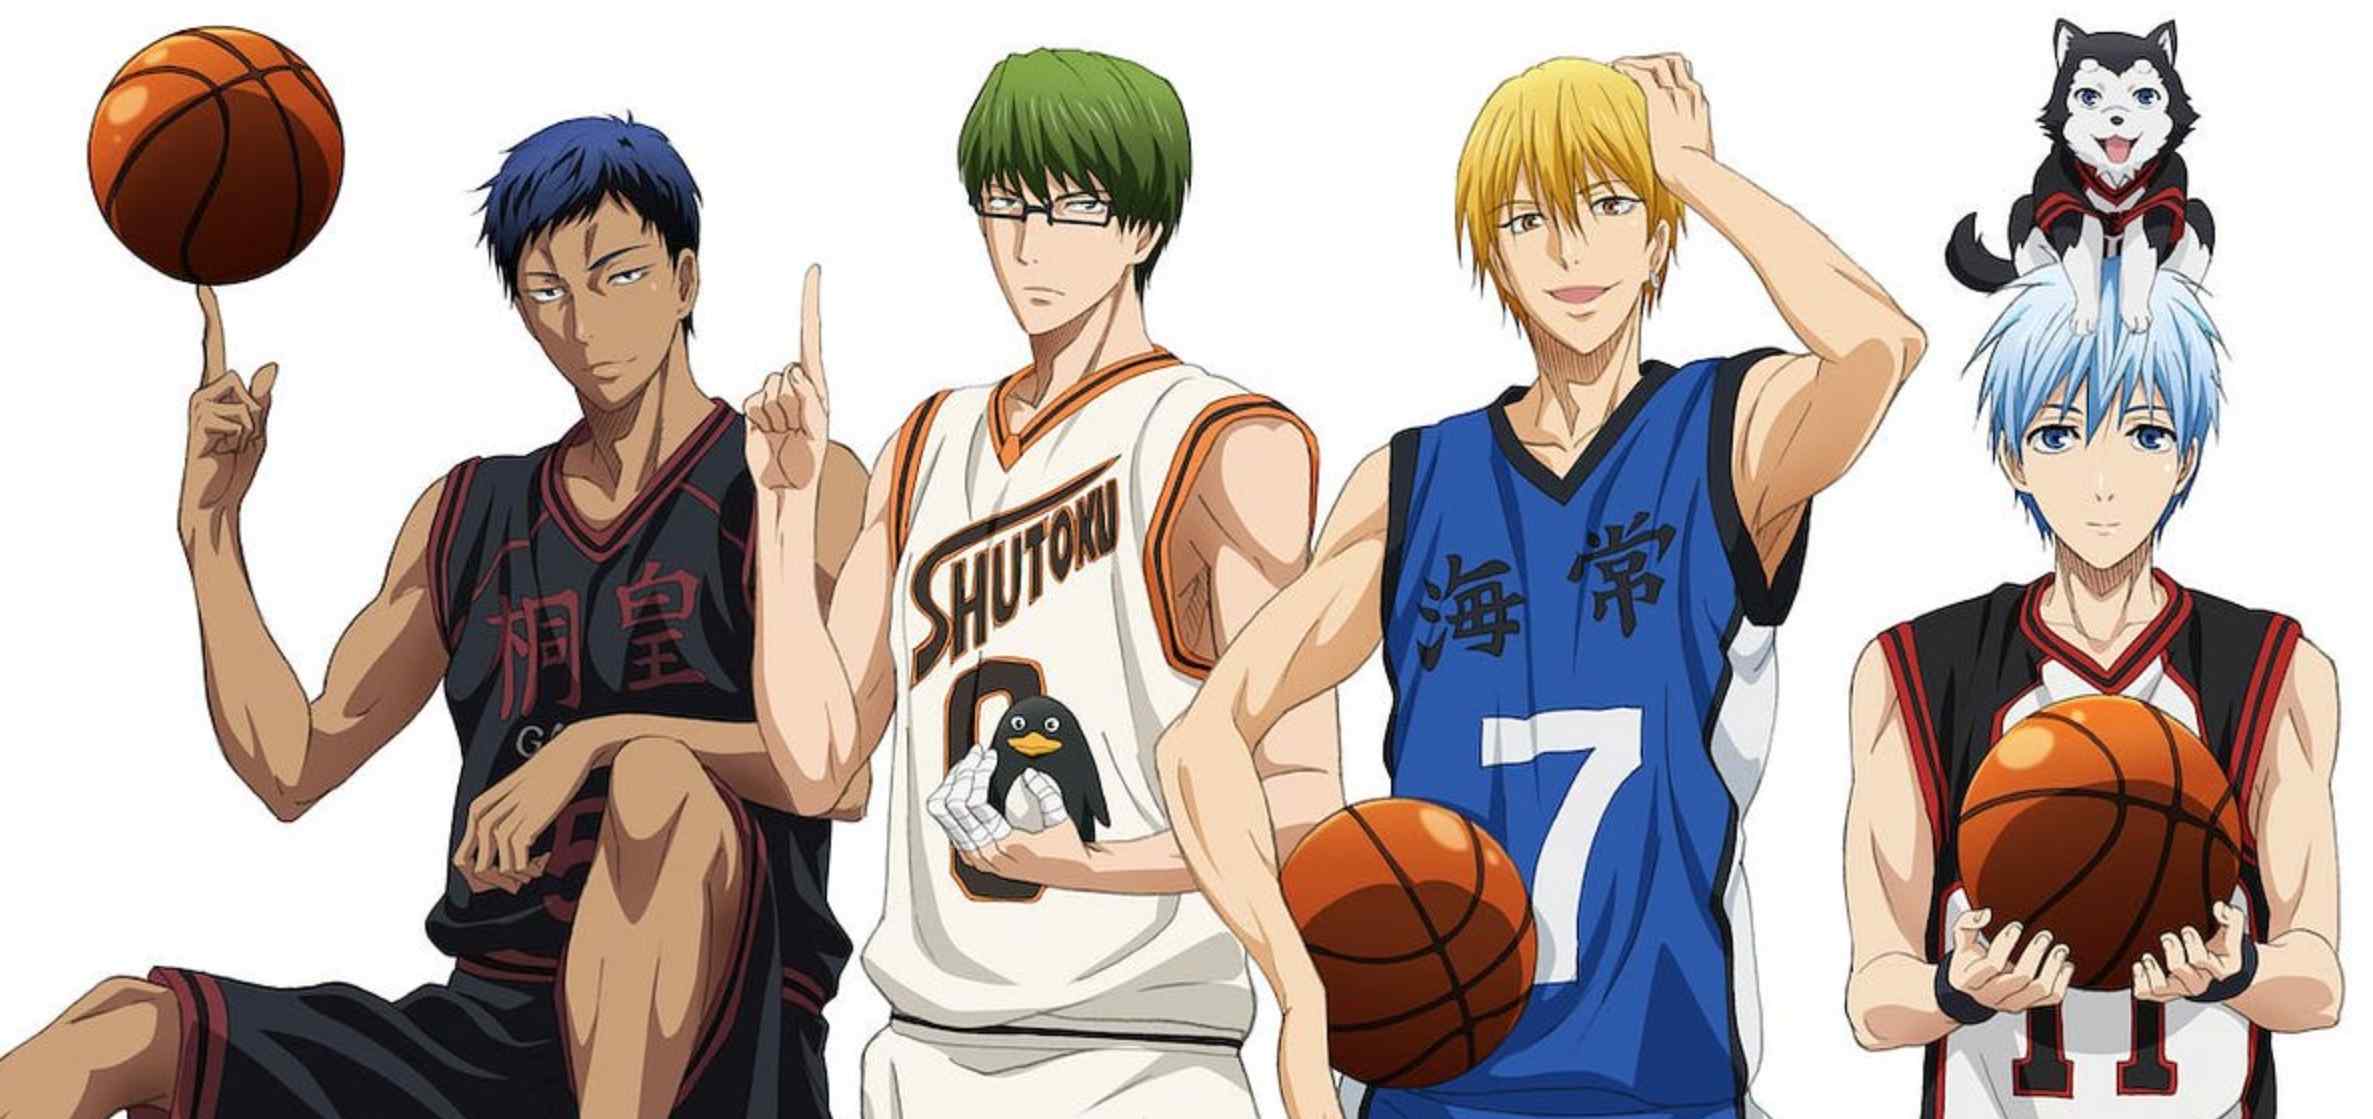 Experience the intense basketball action and teamwork in 'Kuroko's Basketball' anime as skilled players strive for victory on the court.